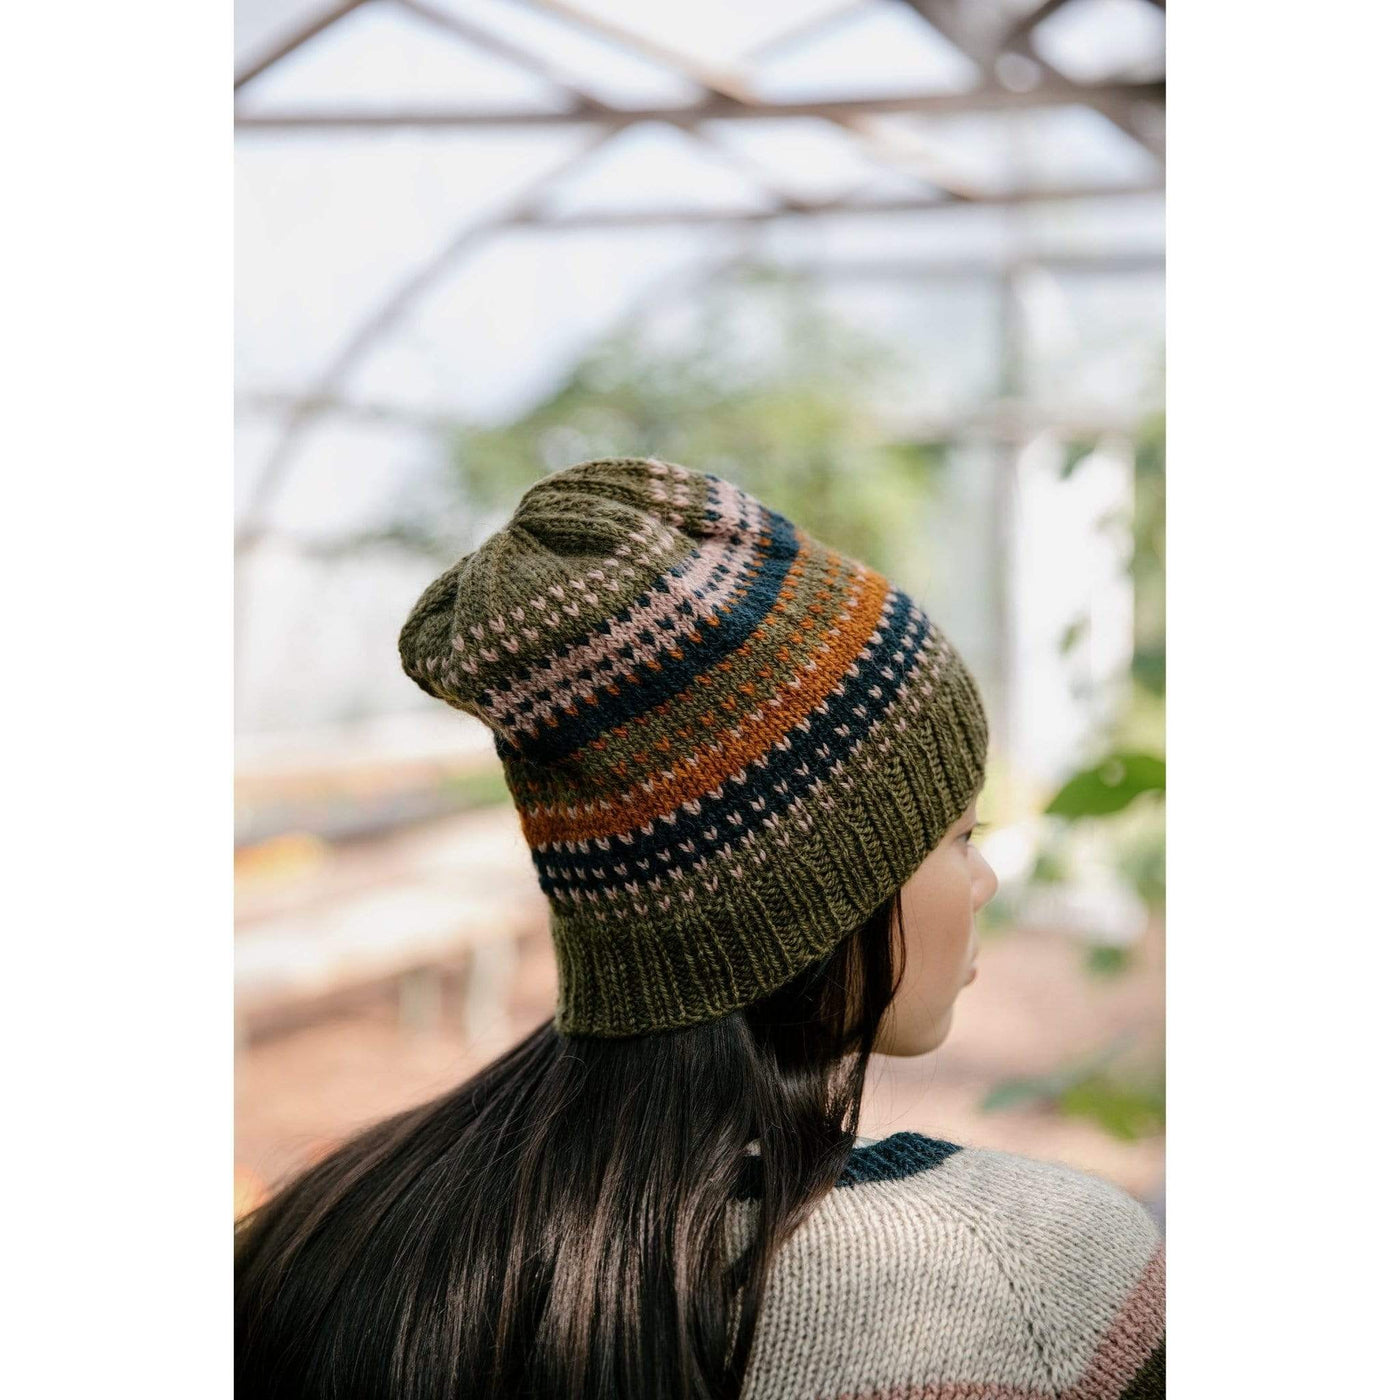 The Woolly Thistle Worsted – A Knitwear Collection Curated by Aimée Gille of La Bien Aimée published by Laine woman wearing green, blue, orange, and beige knitted beanie